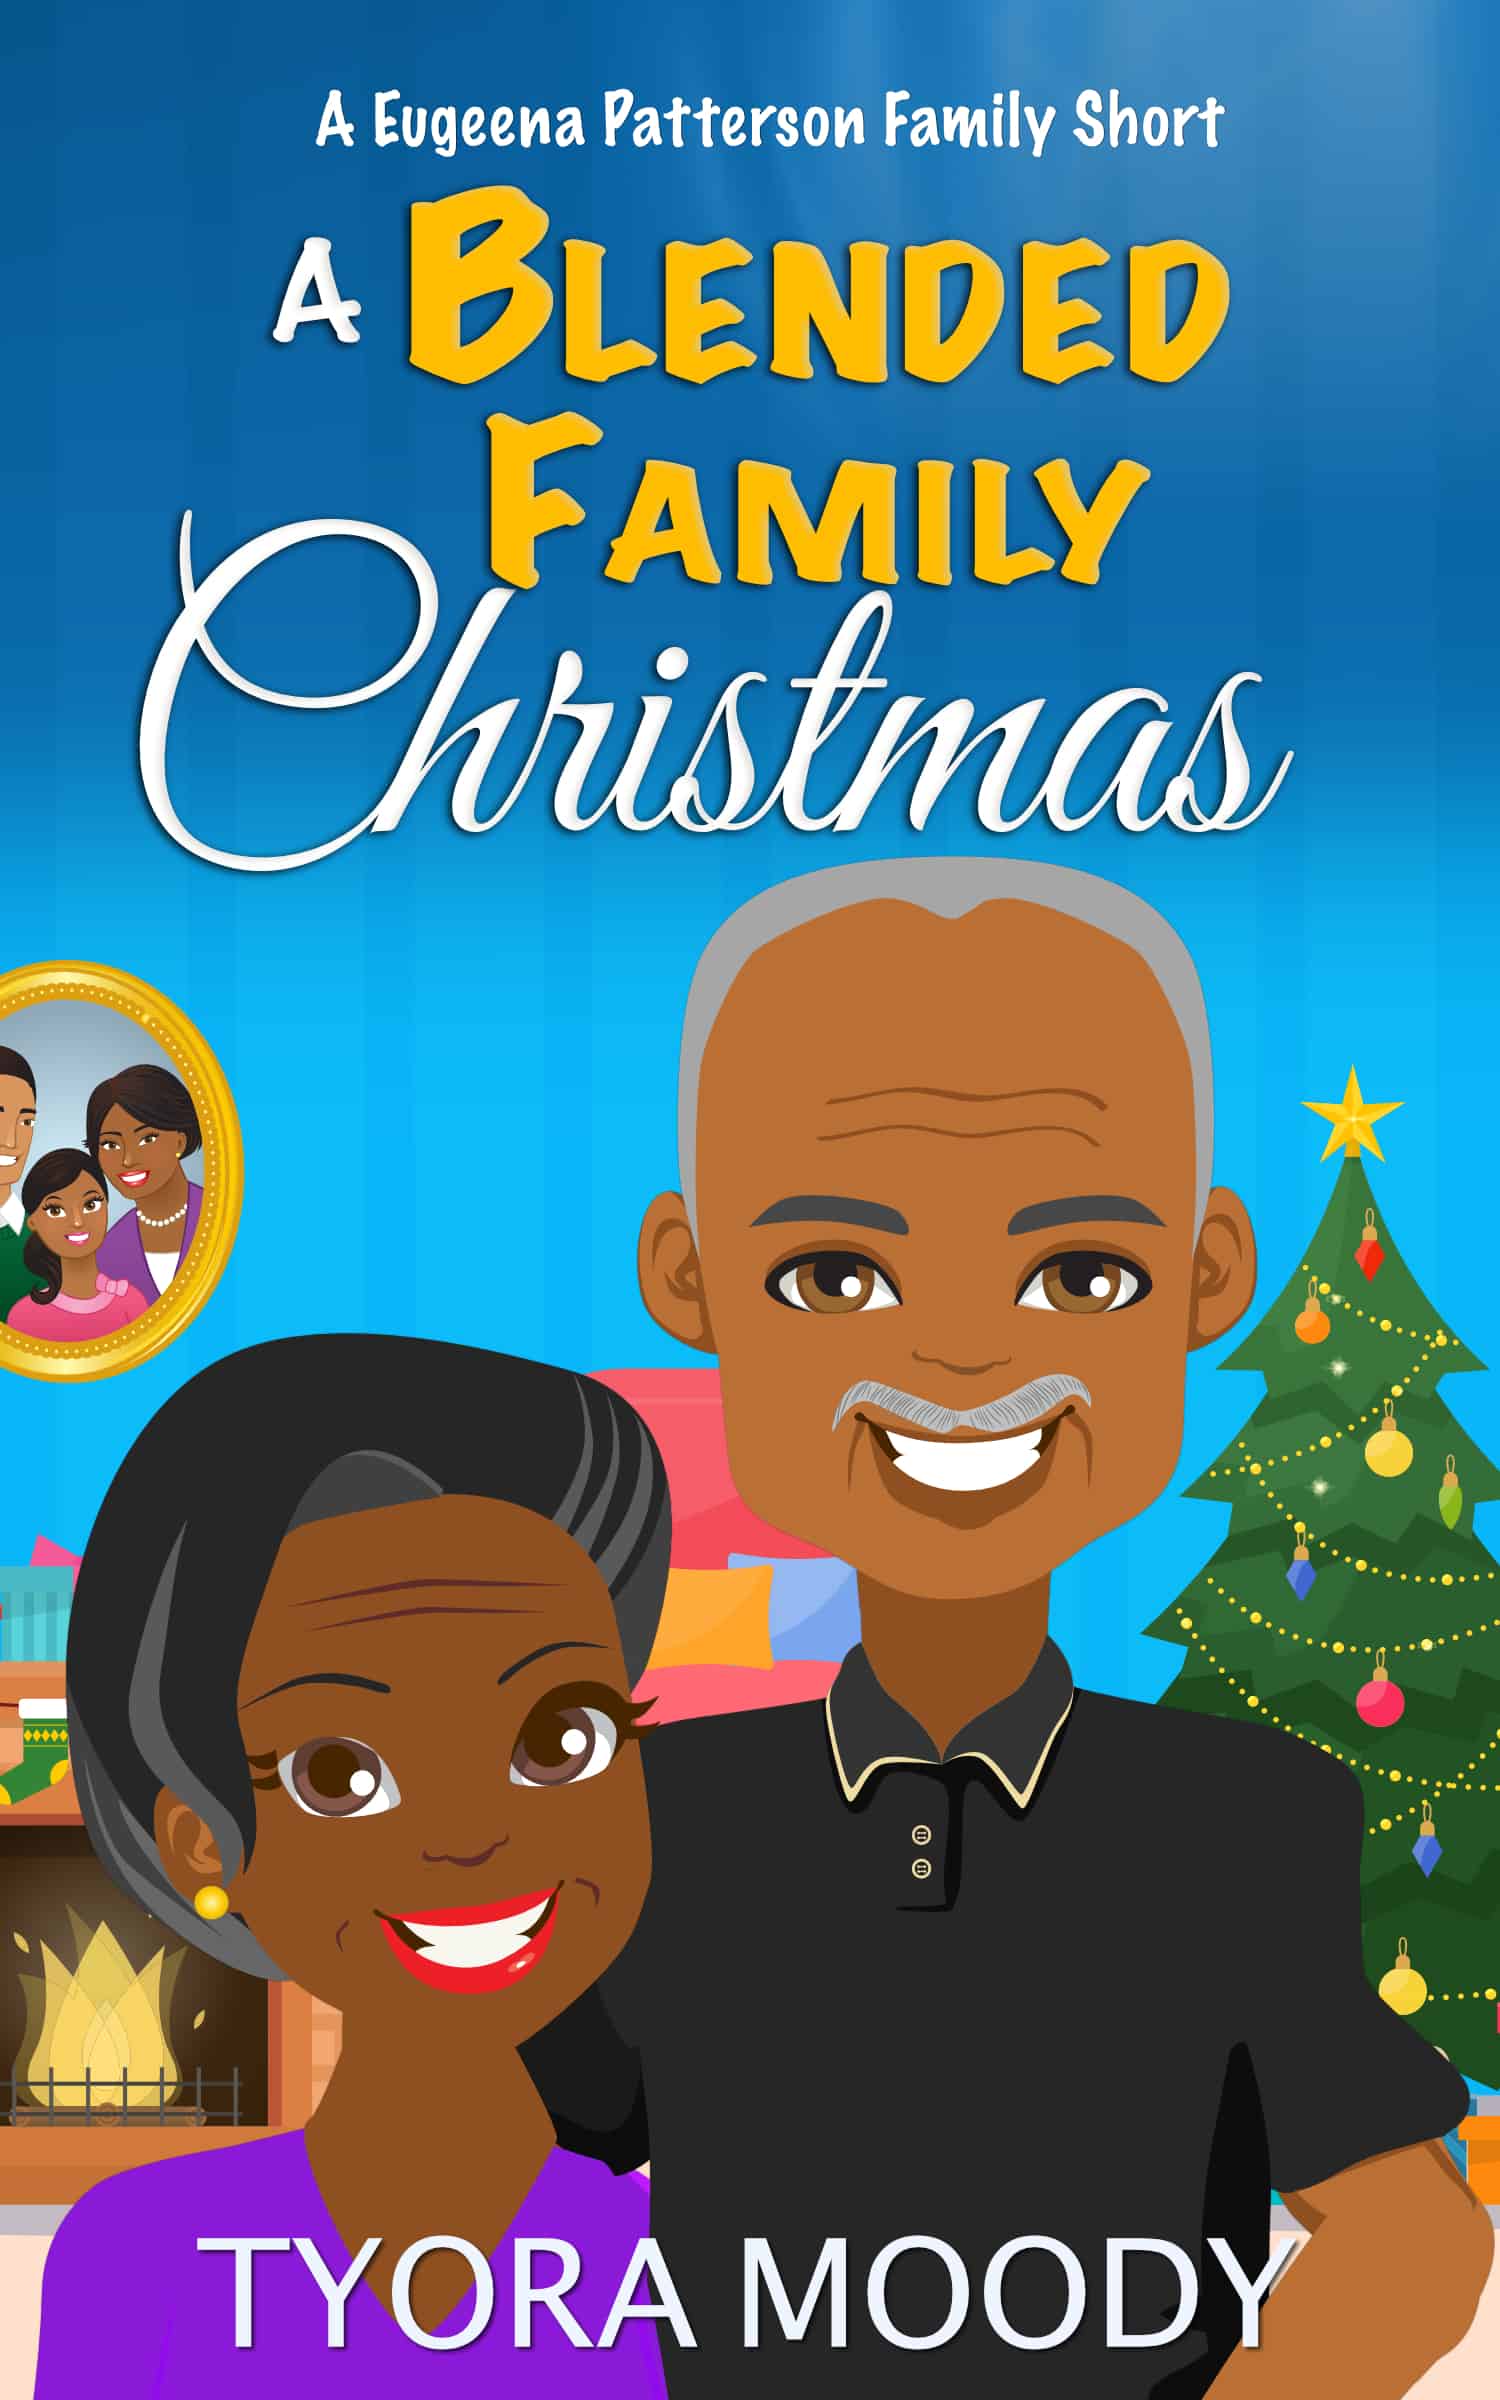 A Blended Family Christmas (Eugeena Patterson Family Short 2)